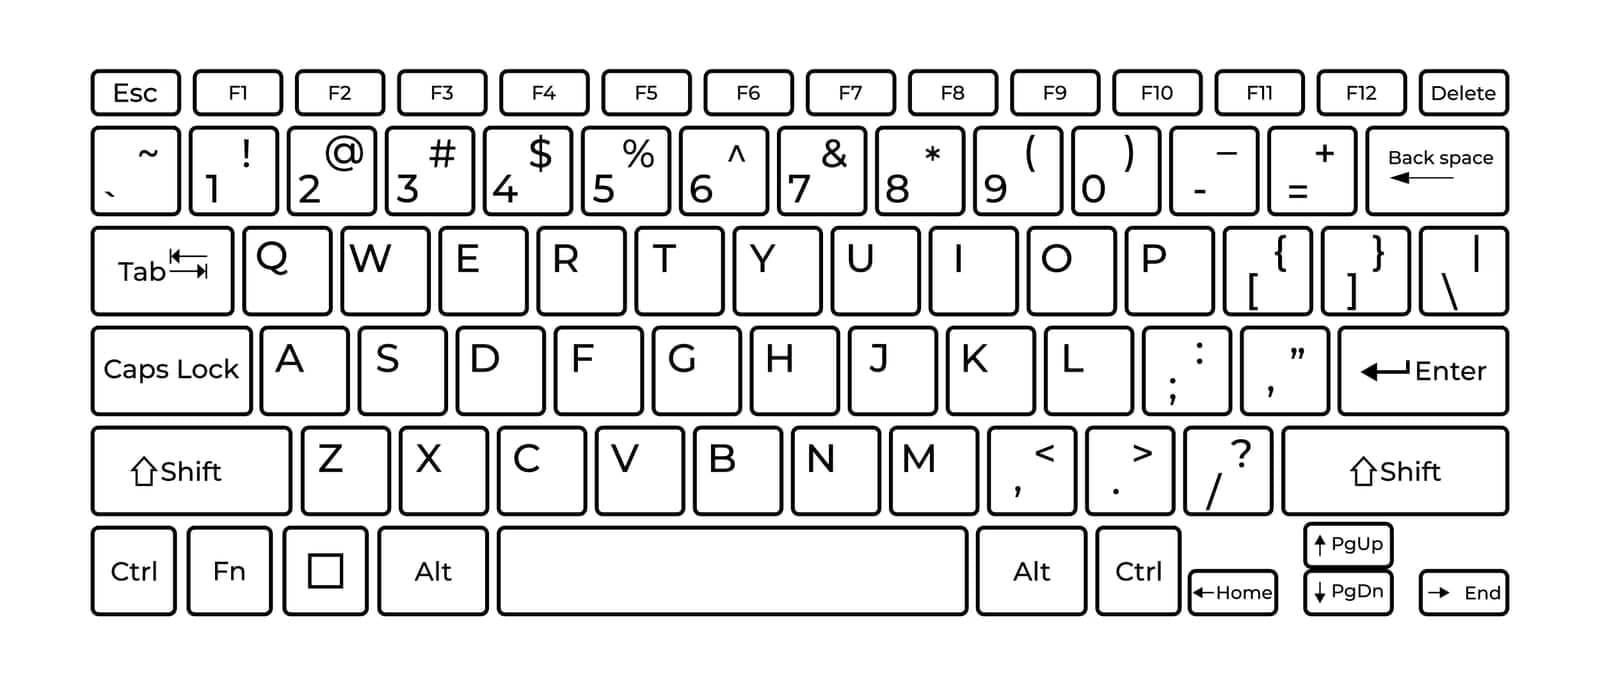 Computer keyboard button layout template with letters for graphic use. Vector illustration by Aozora